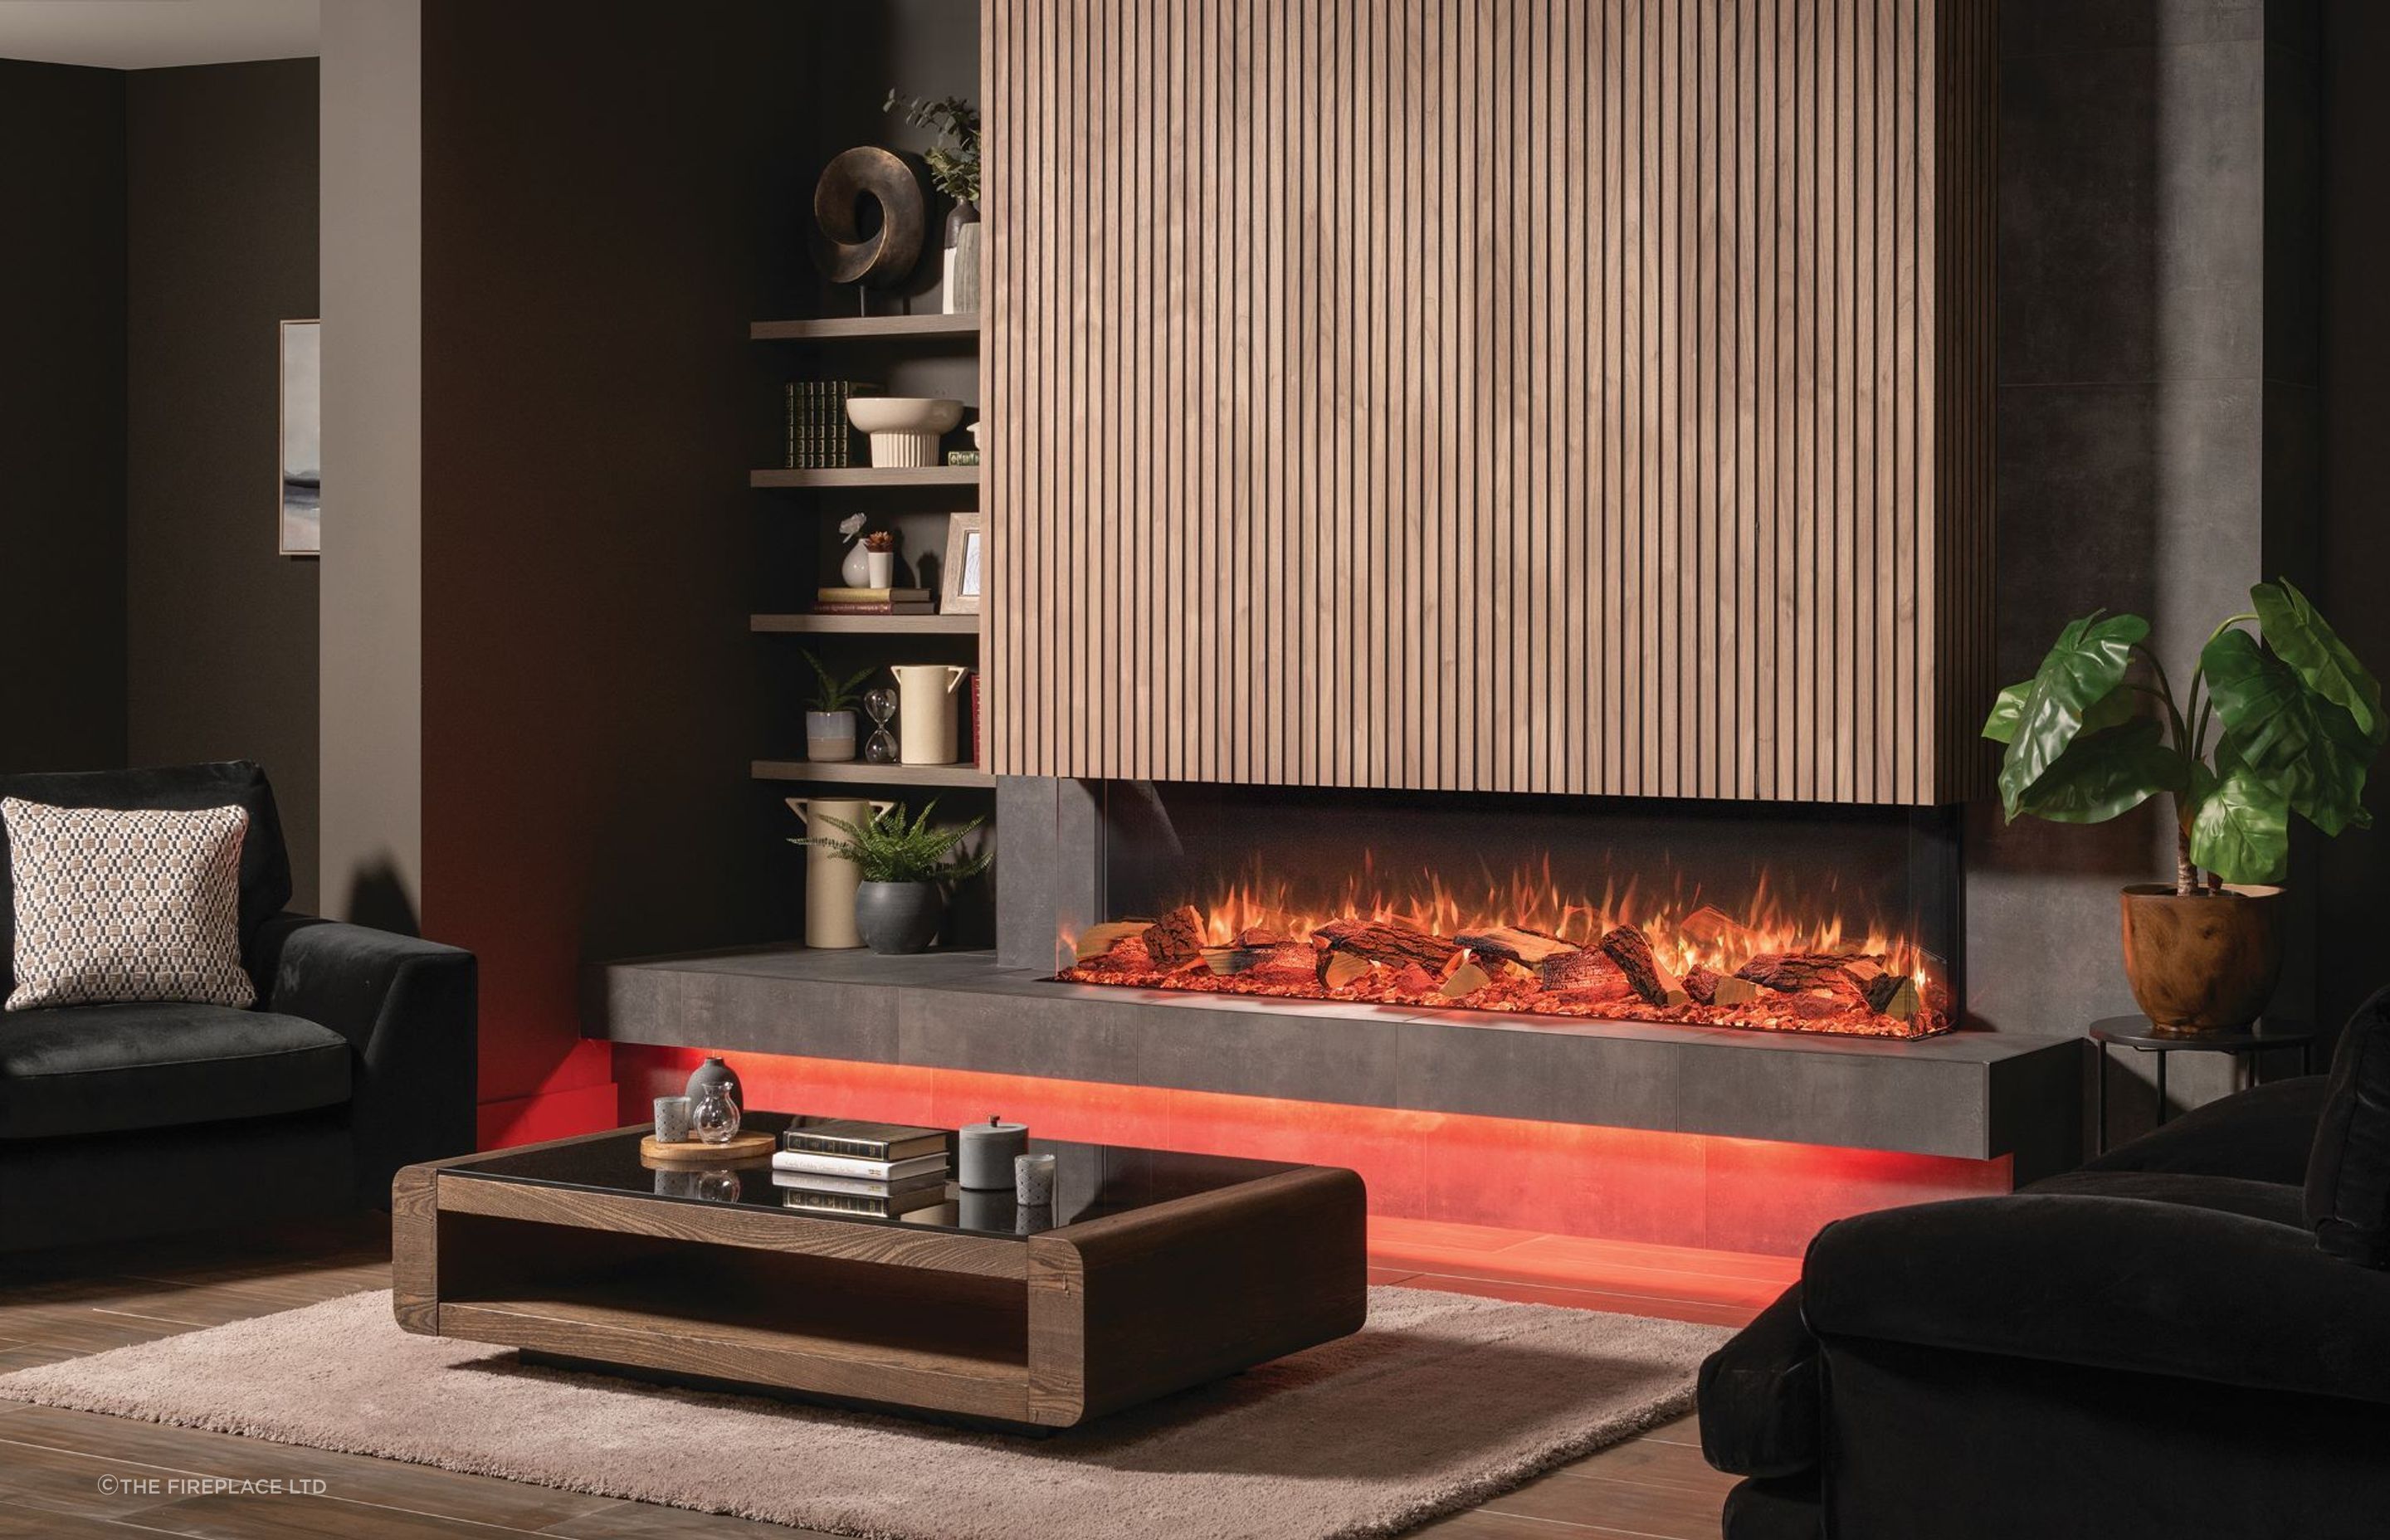 A fireplace, like this sophisticated Onyx Avanti Electric Fireplace, is just one way to create a focal point in a living room.